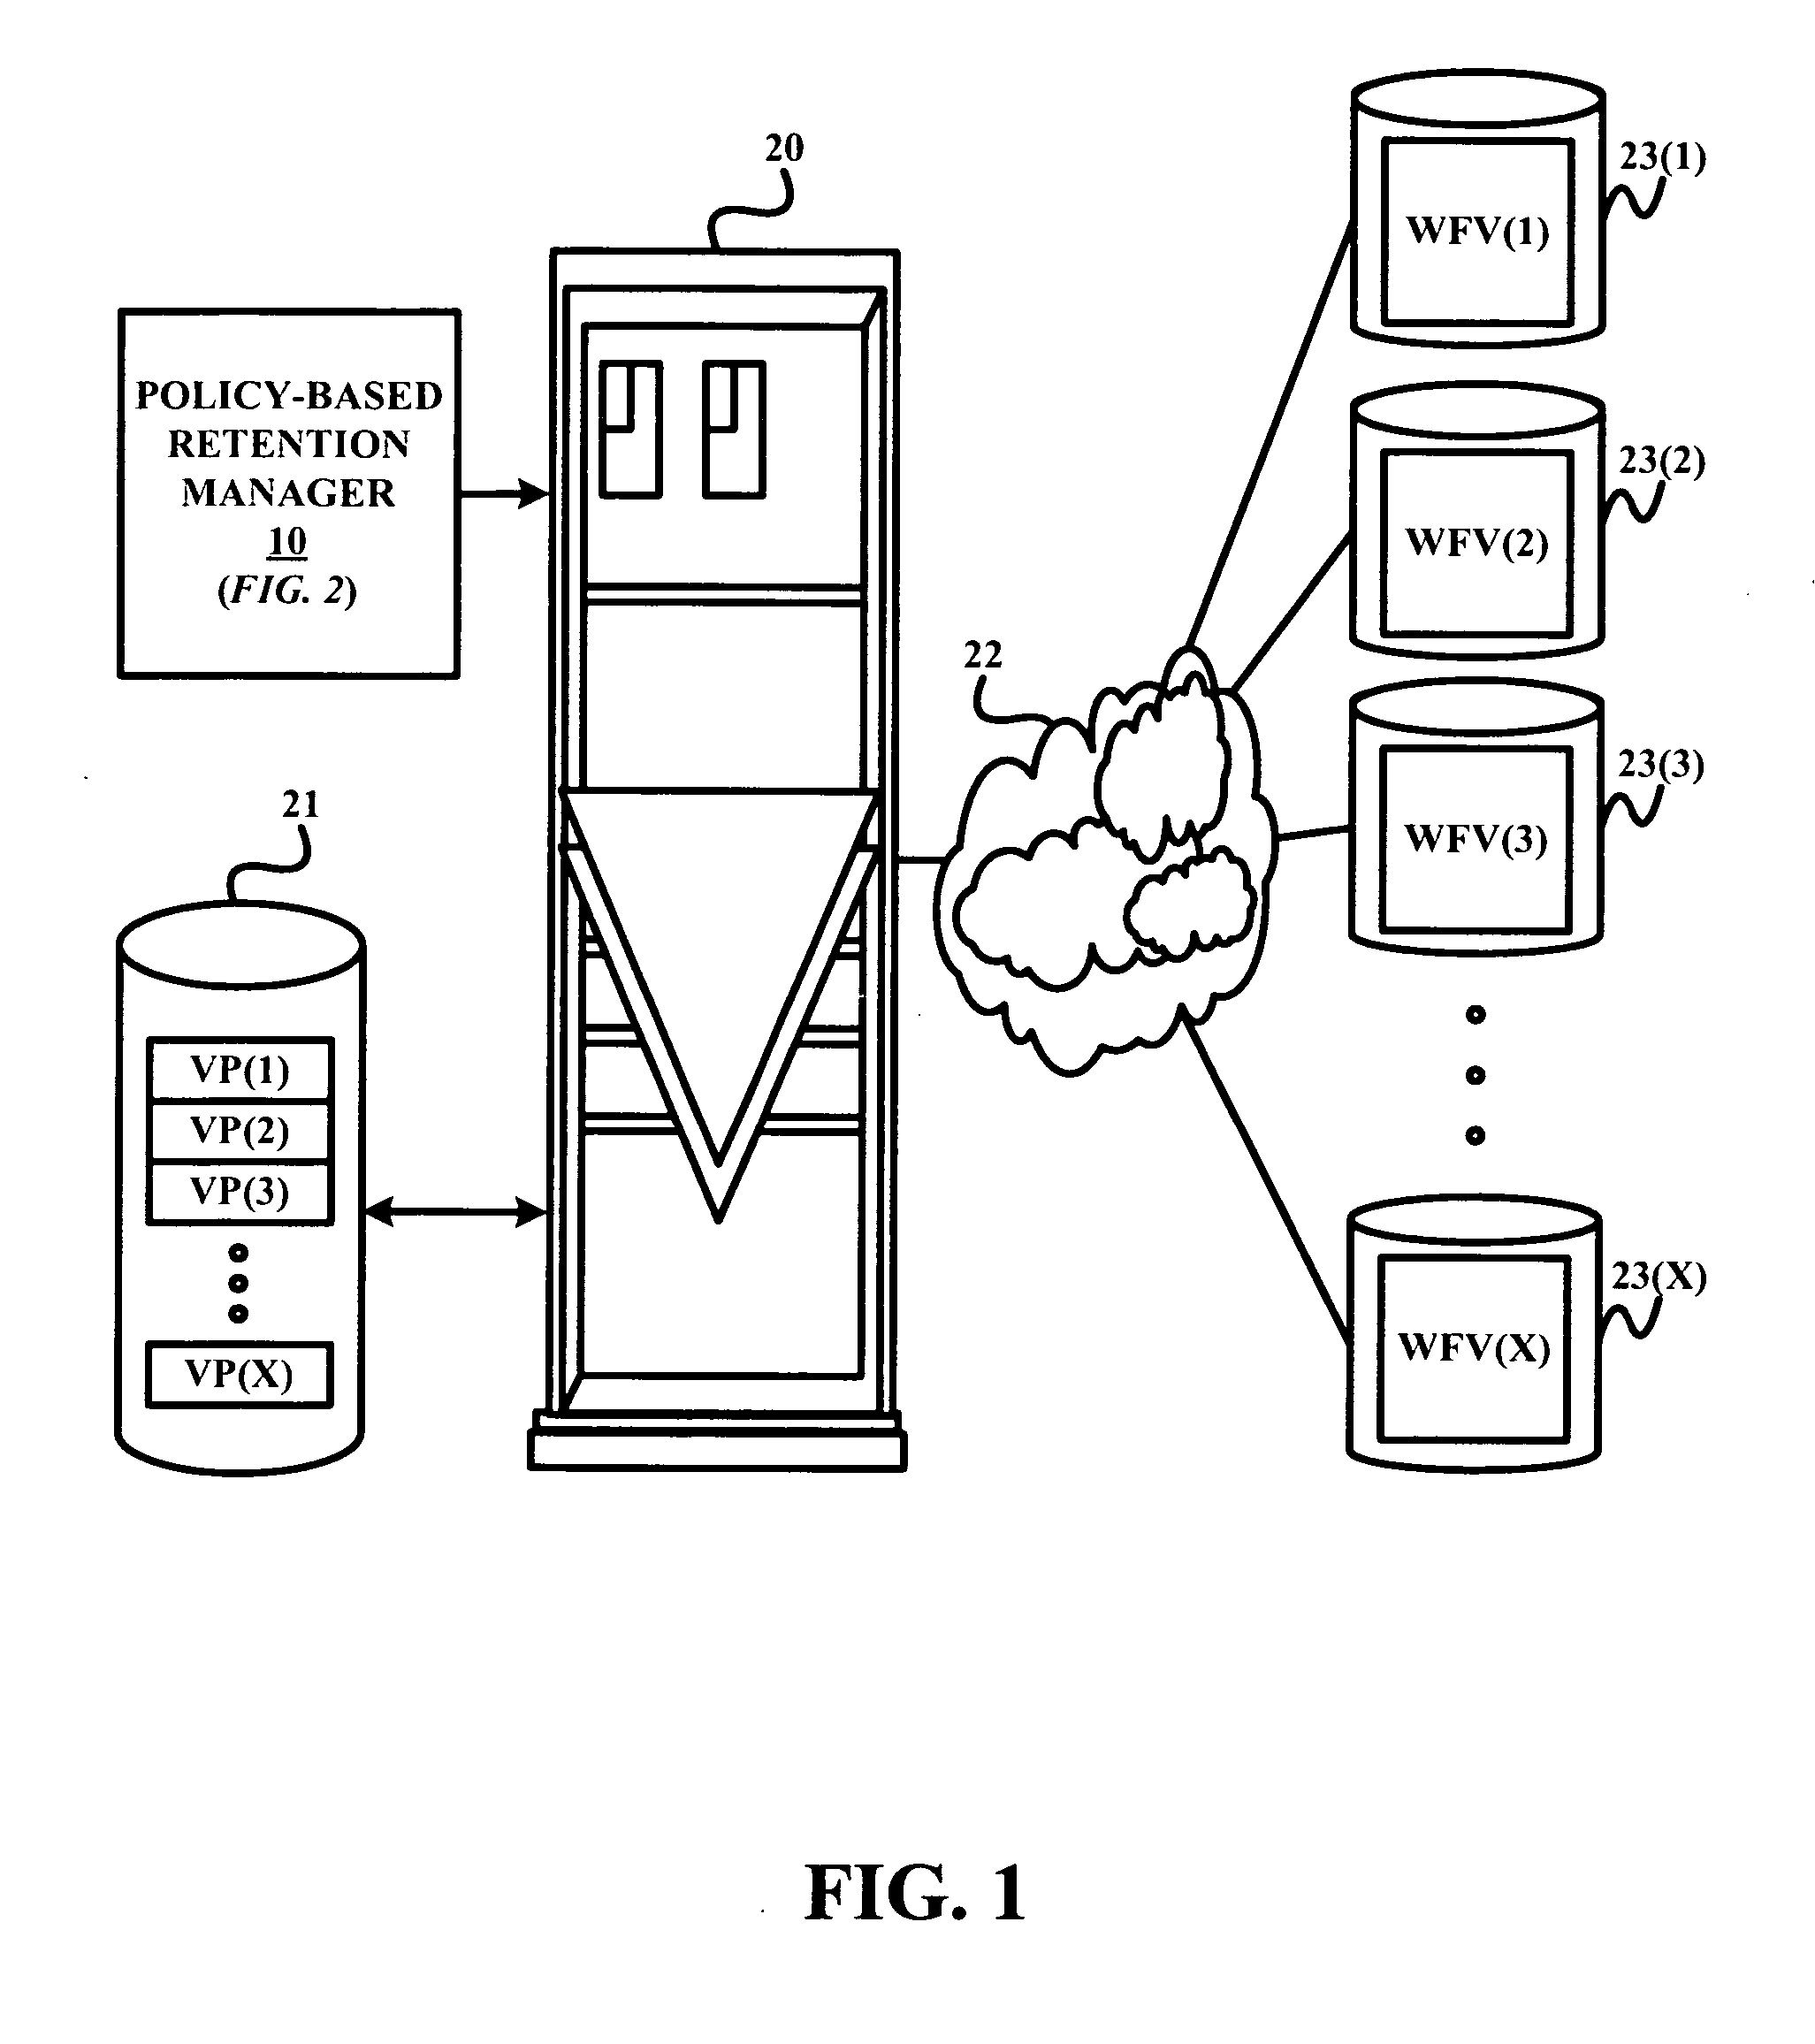 Method for protecting and managing retention of data on worm media